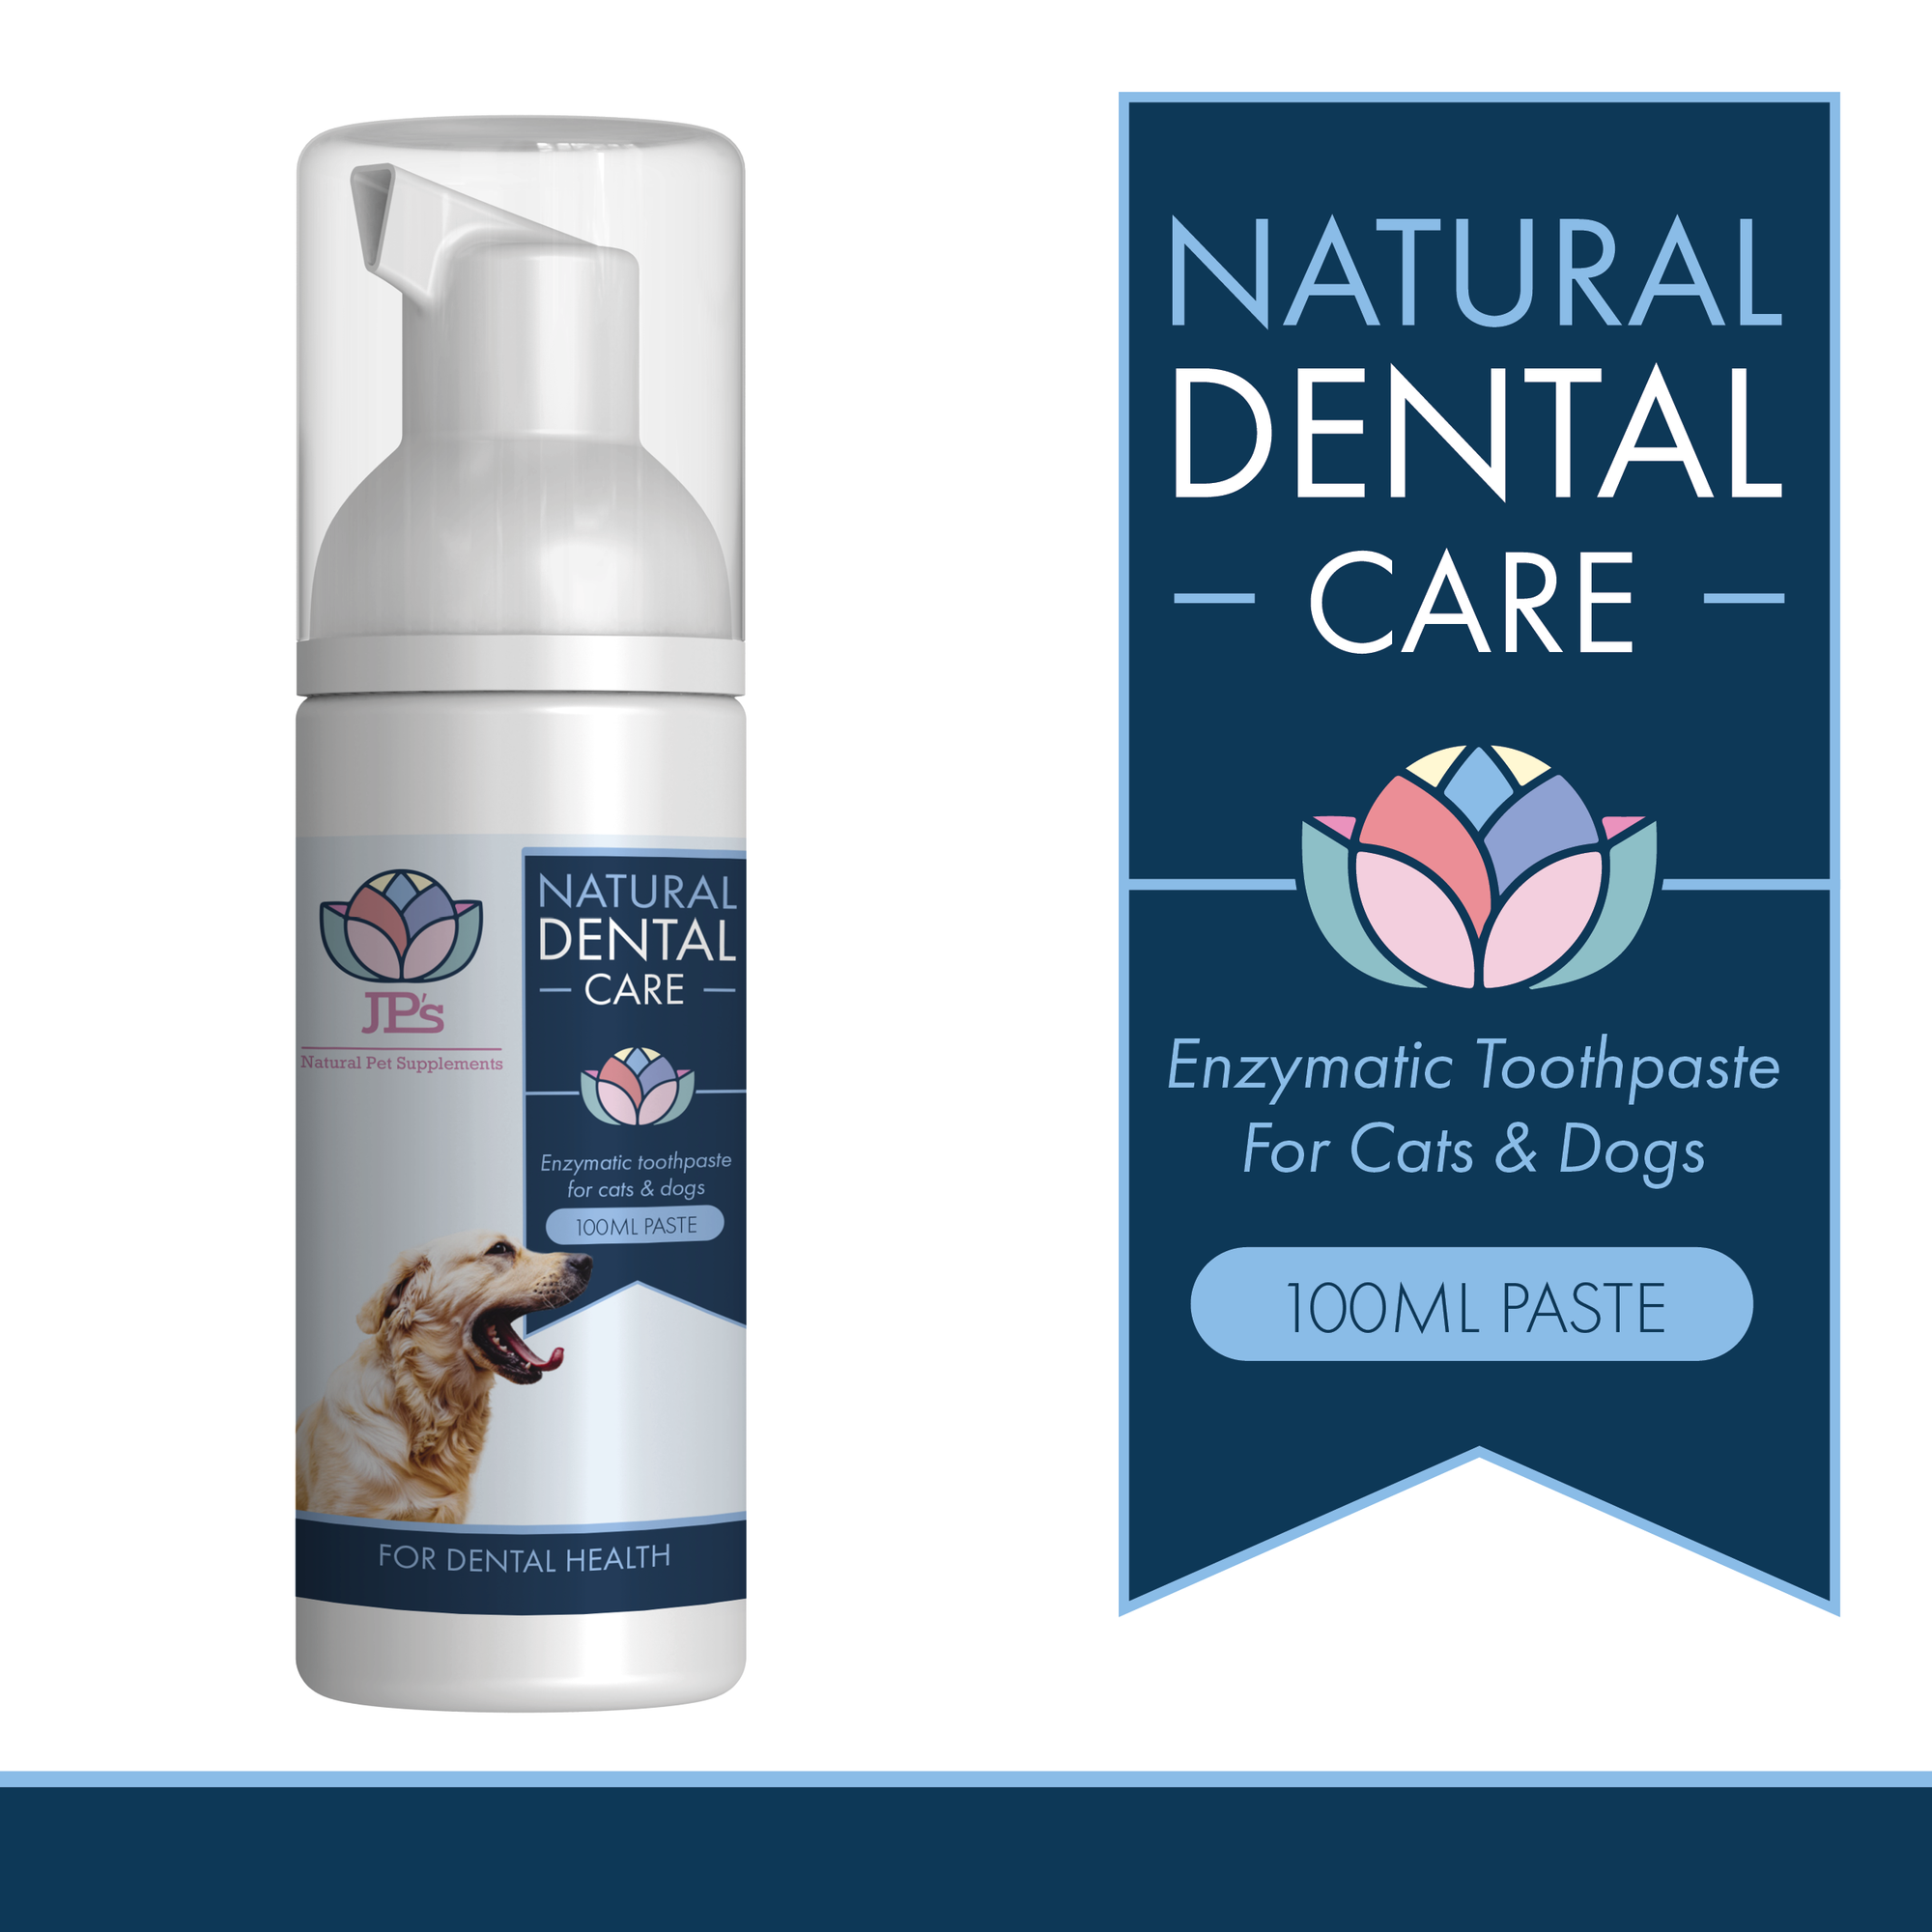 Natural toothpaste for cats & dogs